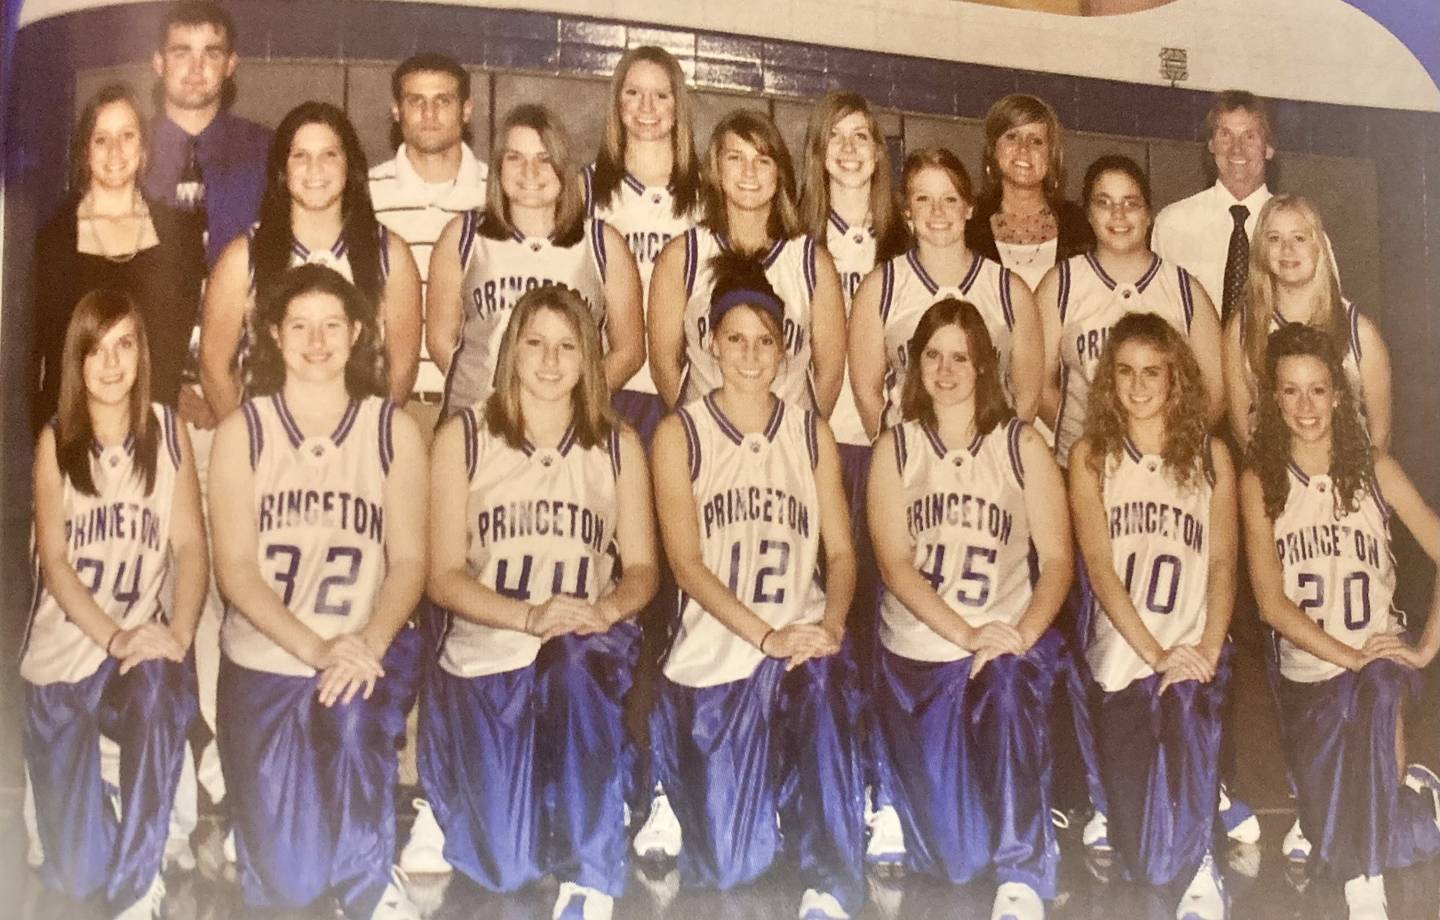 The 2006-07 Princeton girls basketball team is the only team to win a sectional championship in school history, reaching the Class A Sweet 16 (supersectional). Team members were (front row, from left) Tara Scott, Samantha Young, Austyn Miller, Josie Gustafson, Ashley Delbridge and Brittney Lowdermilk; (middle row) manager Samantha Fehlhafer, Janese Kunkel, Ashley Donnelly, Amanda Prostko, Maggie Griggs, Cara Taylor and Renee Cowser; and (back row) head coach Spencer Davis, coach Jason Burkiewicz, Brooke Jensen, Katelyn Mansfield, coach Vanessa Madison and coach Scott Jensen.